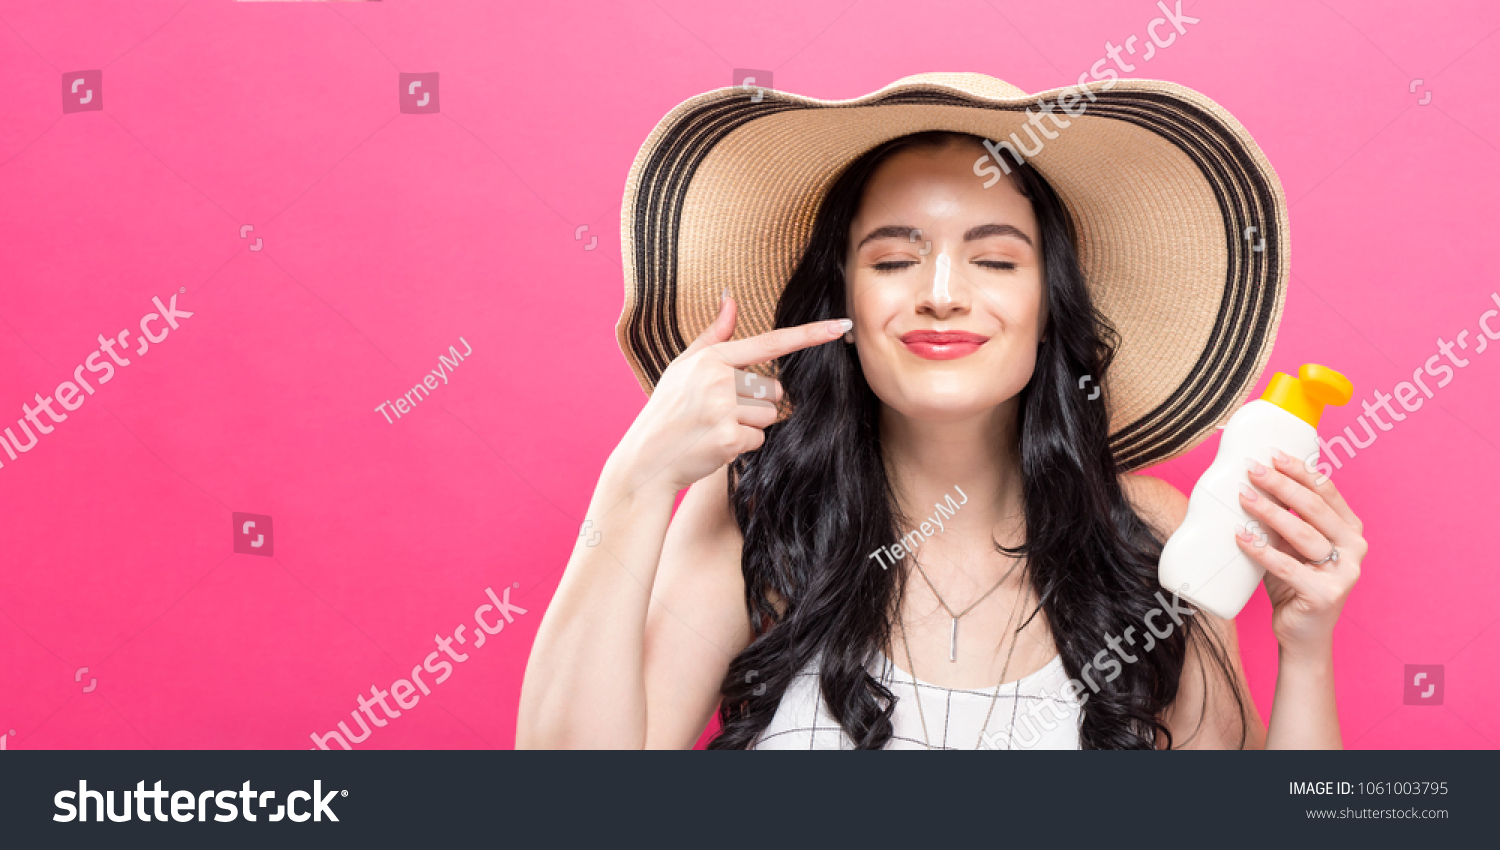 Young woman holding a bottle of sunblock on a solid background #1061003795